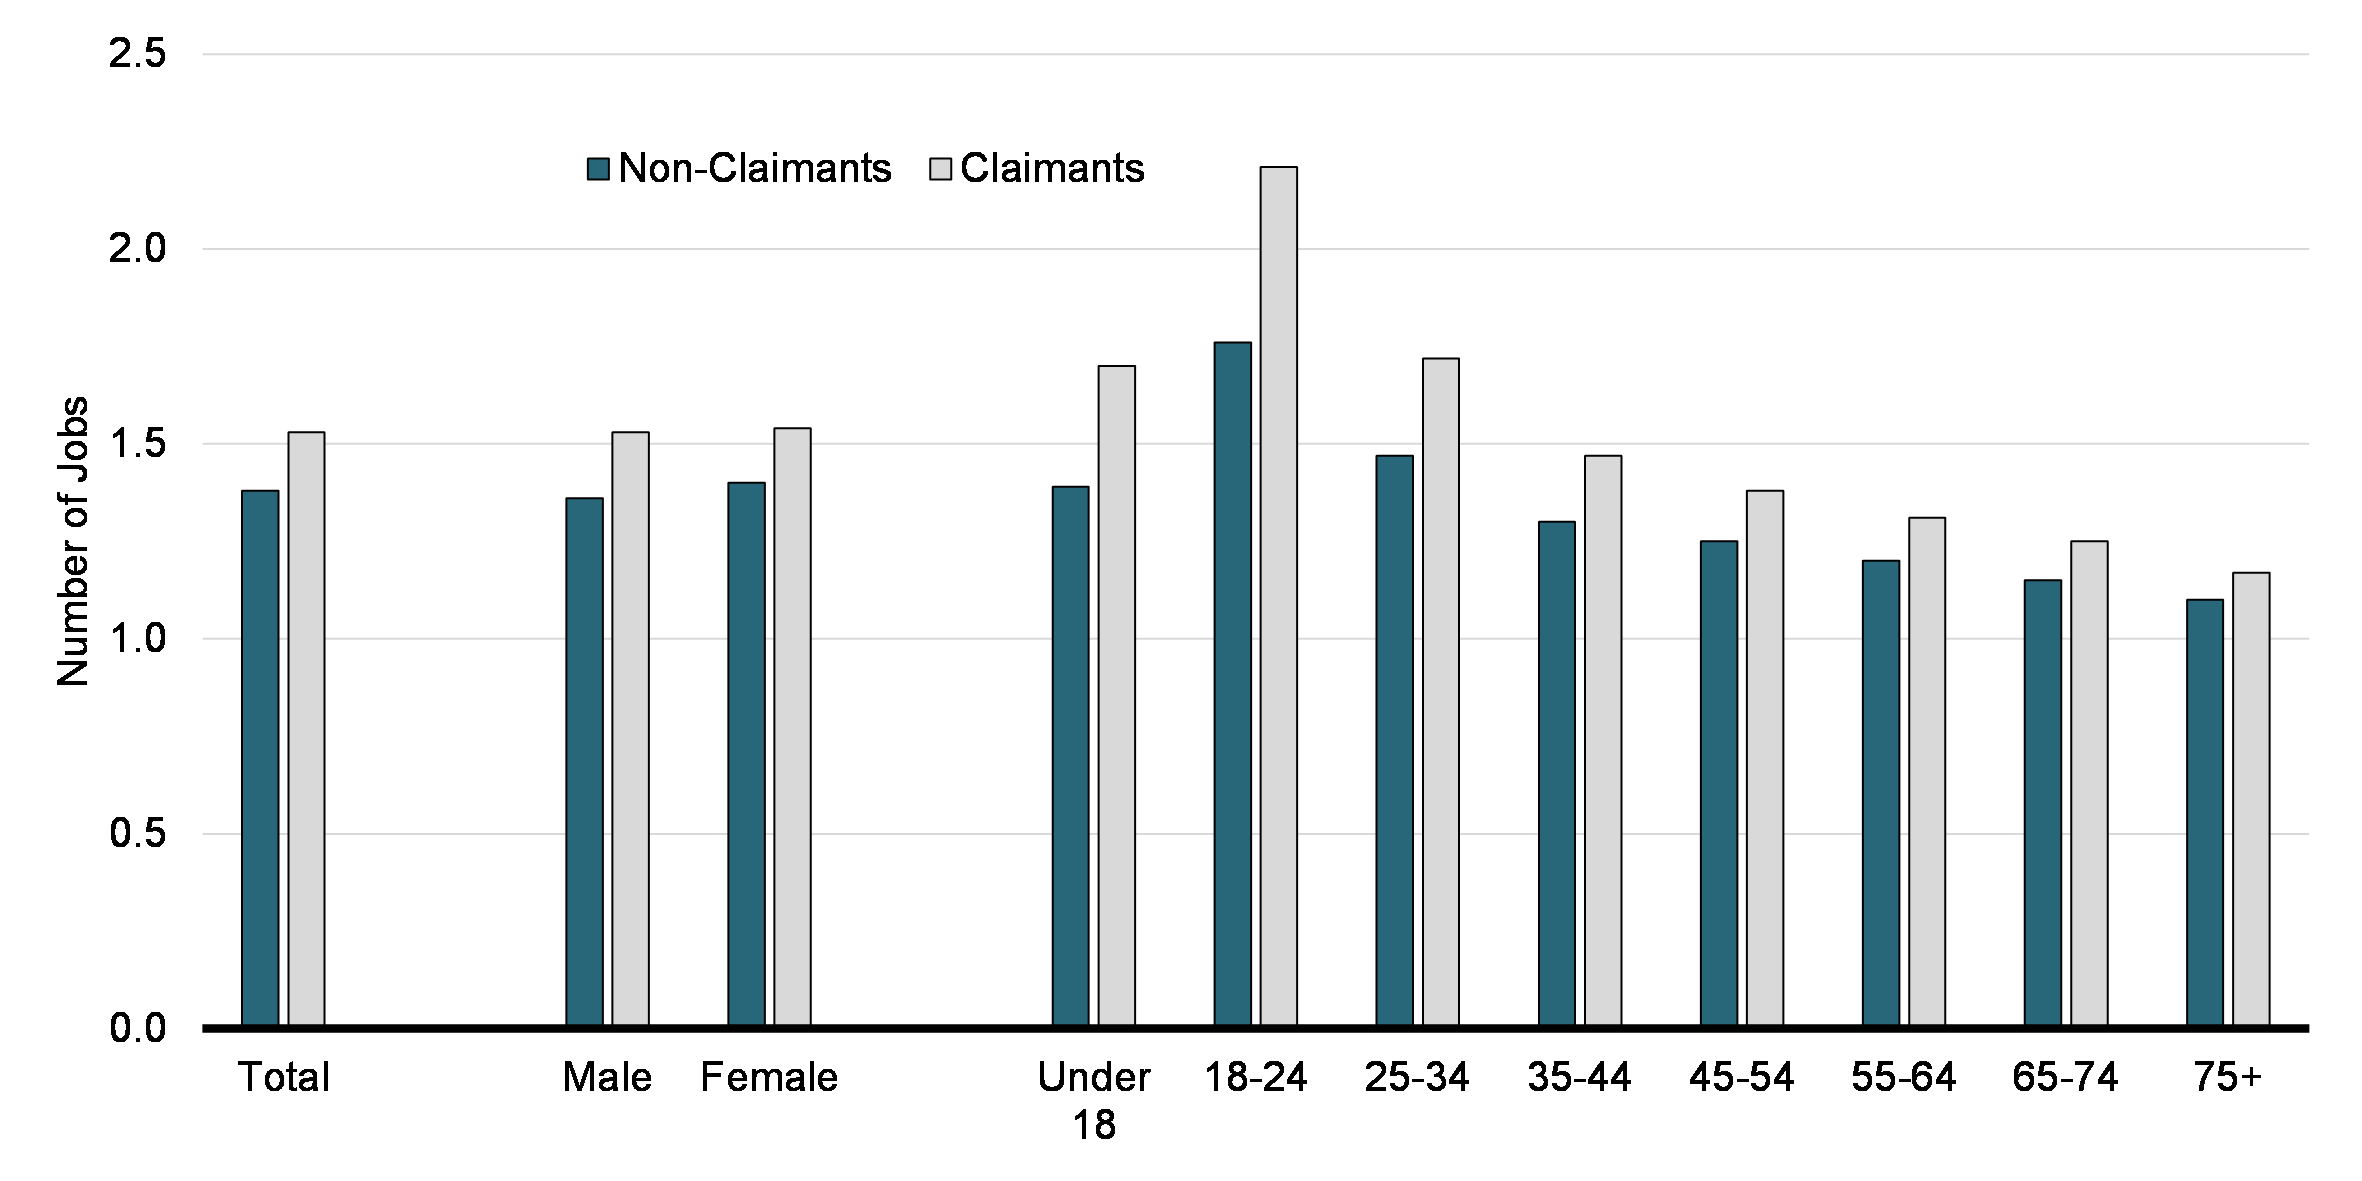 Chart 13: Average Number of Jobs Worked by UPD Claimants and Non-Claimants, by Gender and Age (2019)